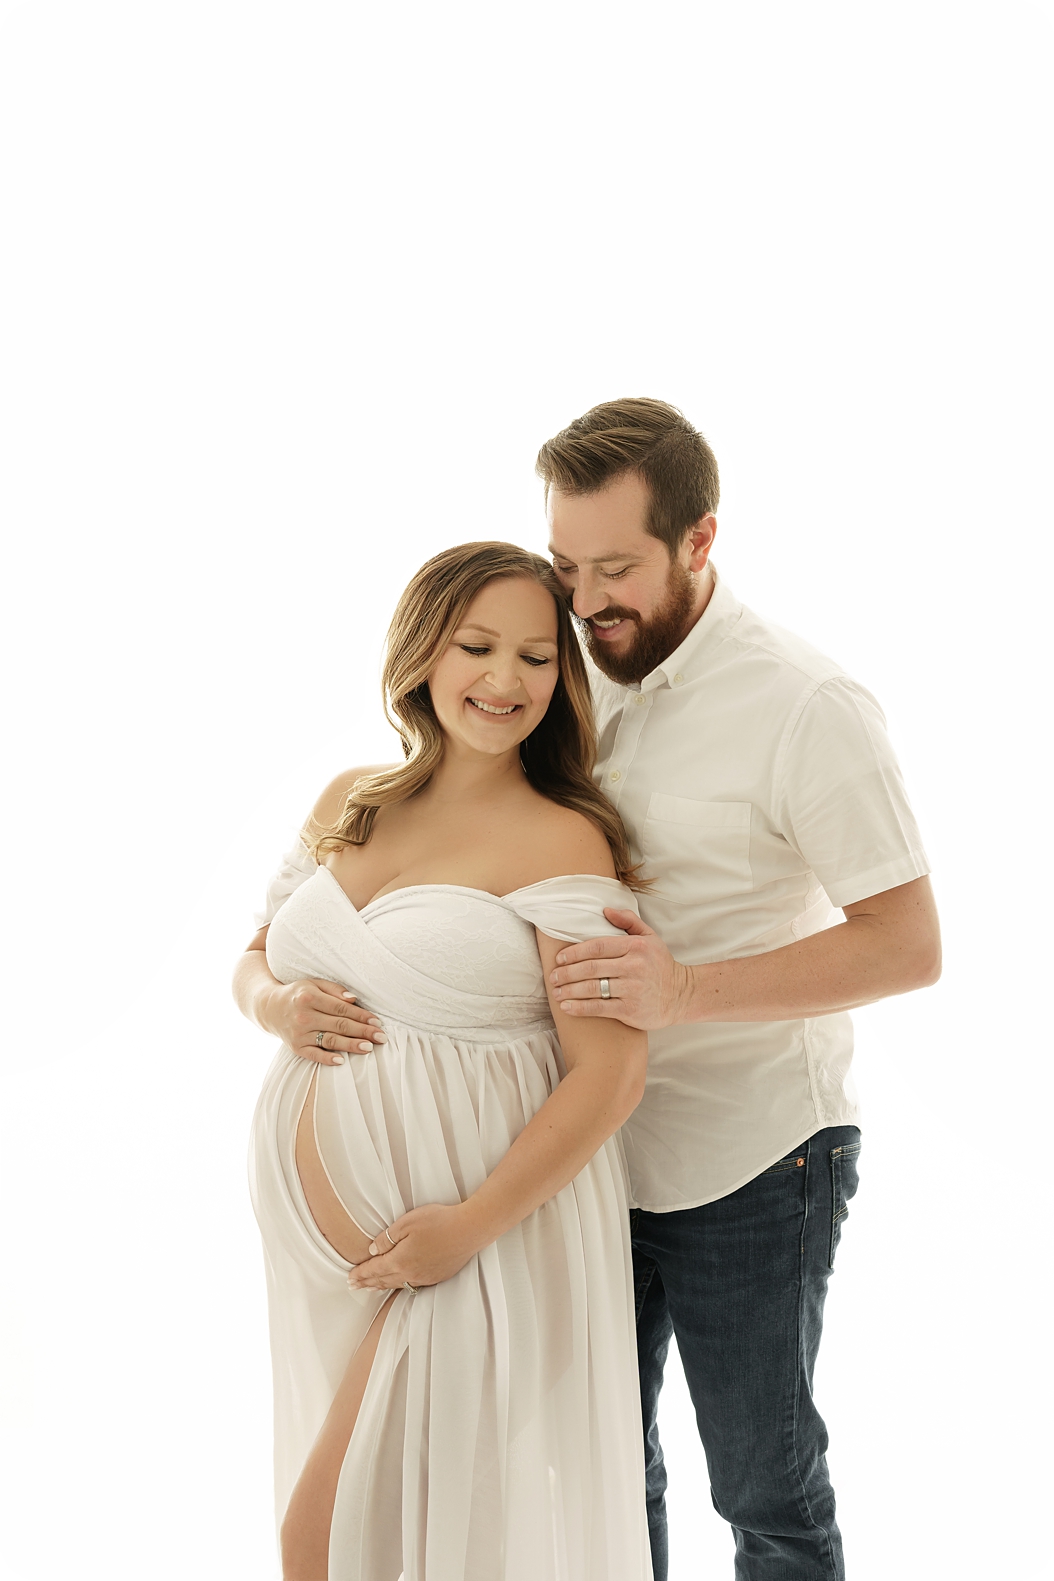 expecting parents pose together on white backdrop in Utah studio during classic studio maternity session 